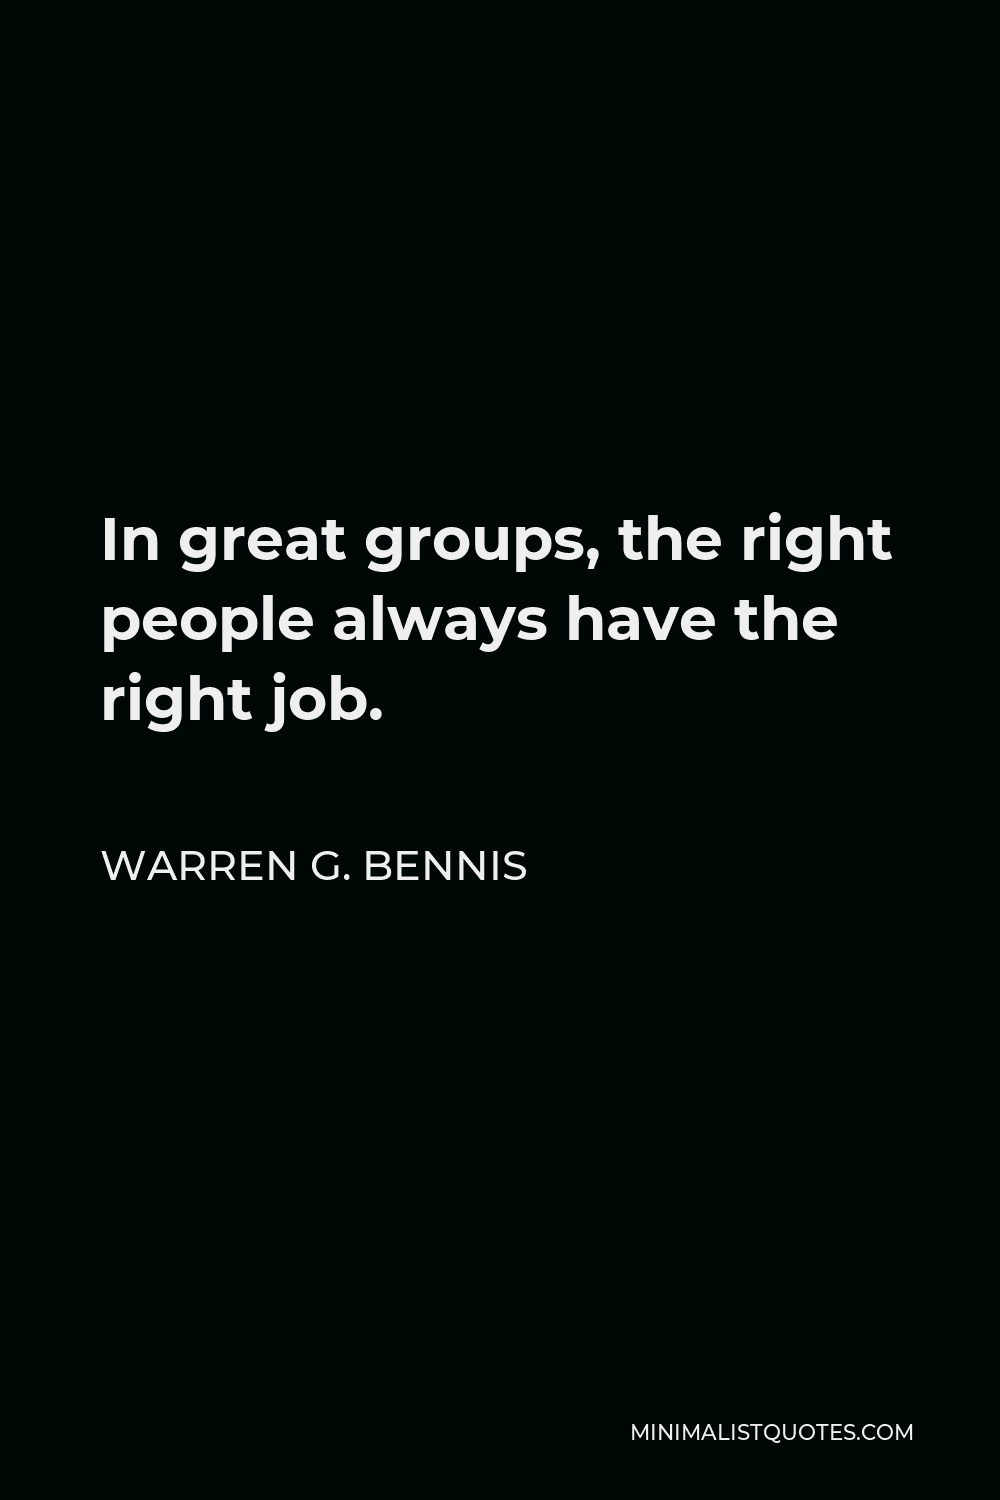 Warren G. Bennis Quote - In great groups, the right people always have the right job.